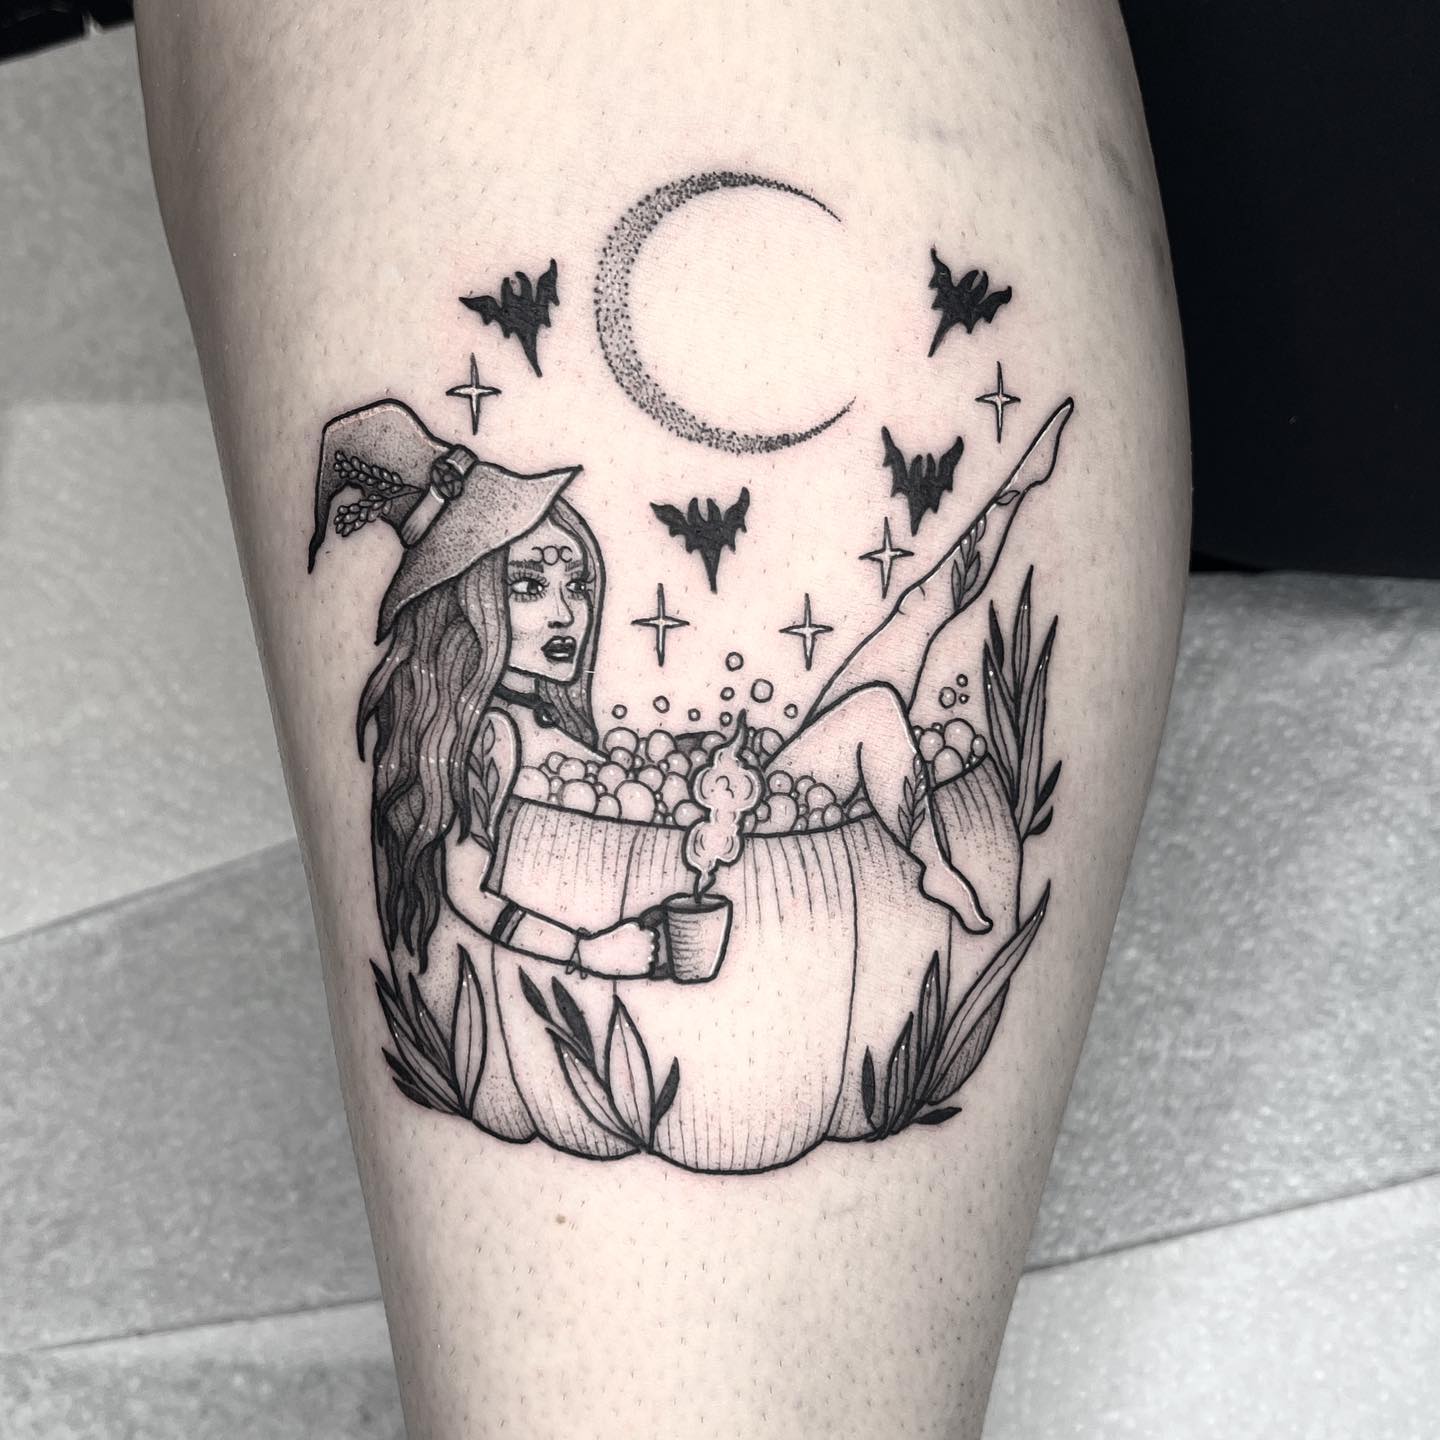 Tattoo uploaded by Alice Totemica  black witch burning tattoo  blackwork totemica ontheroad  Tattoodo